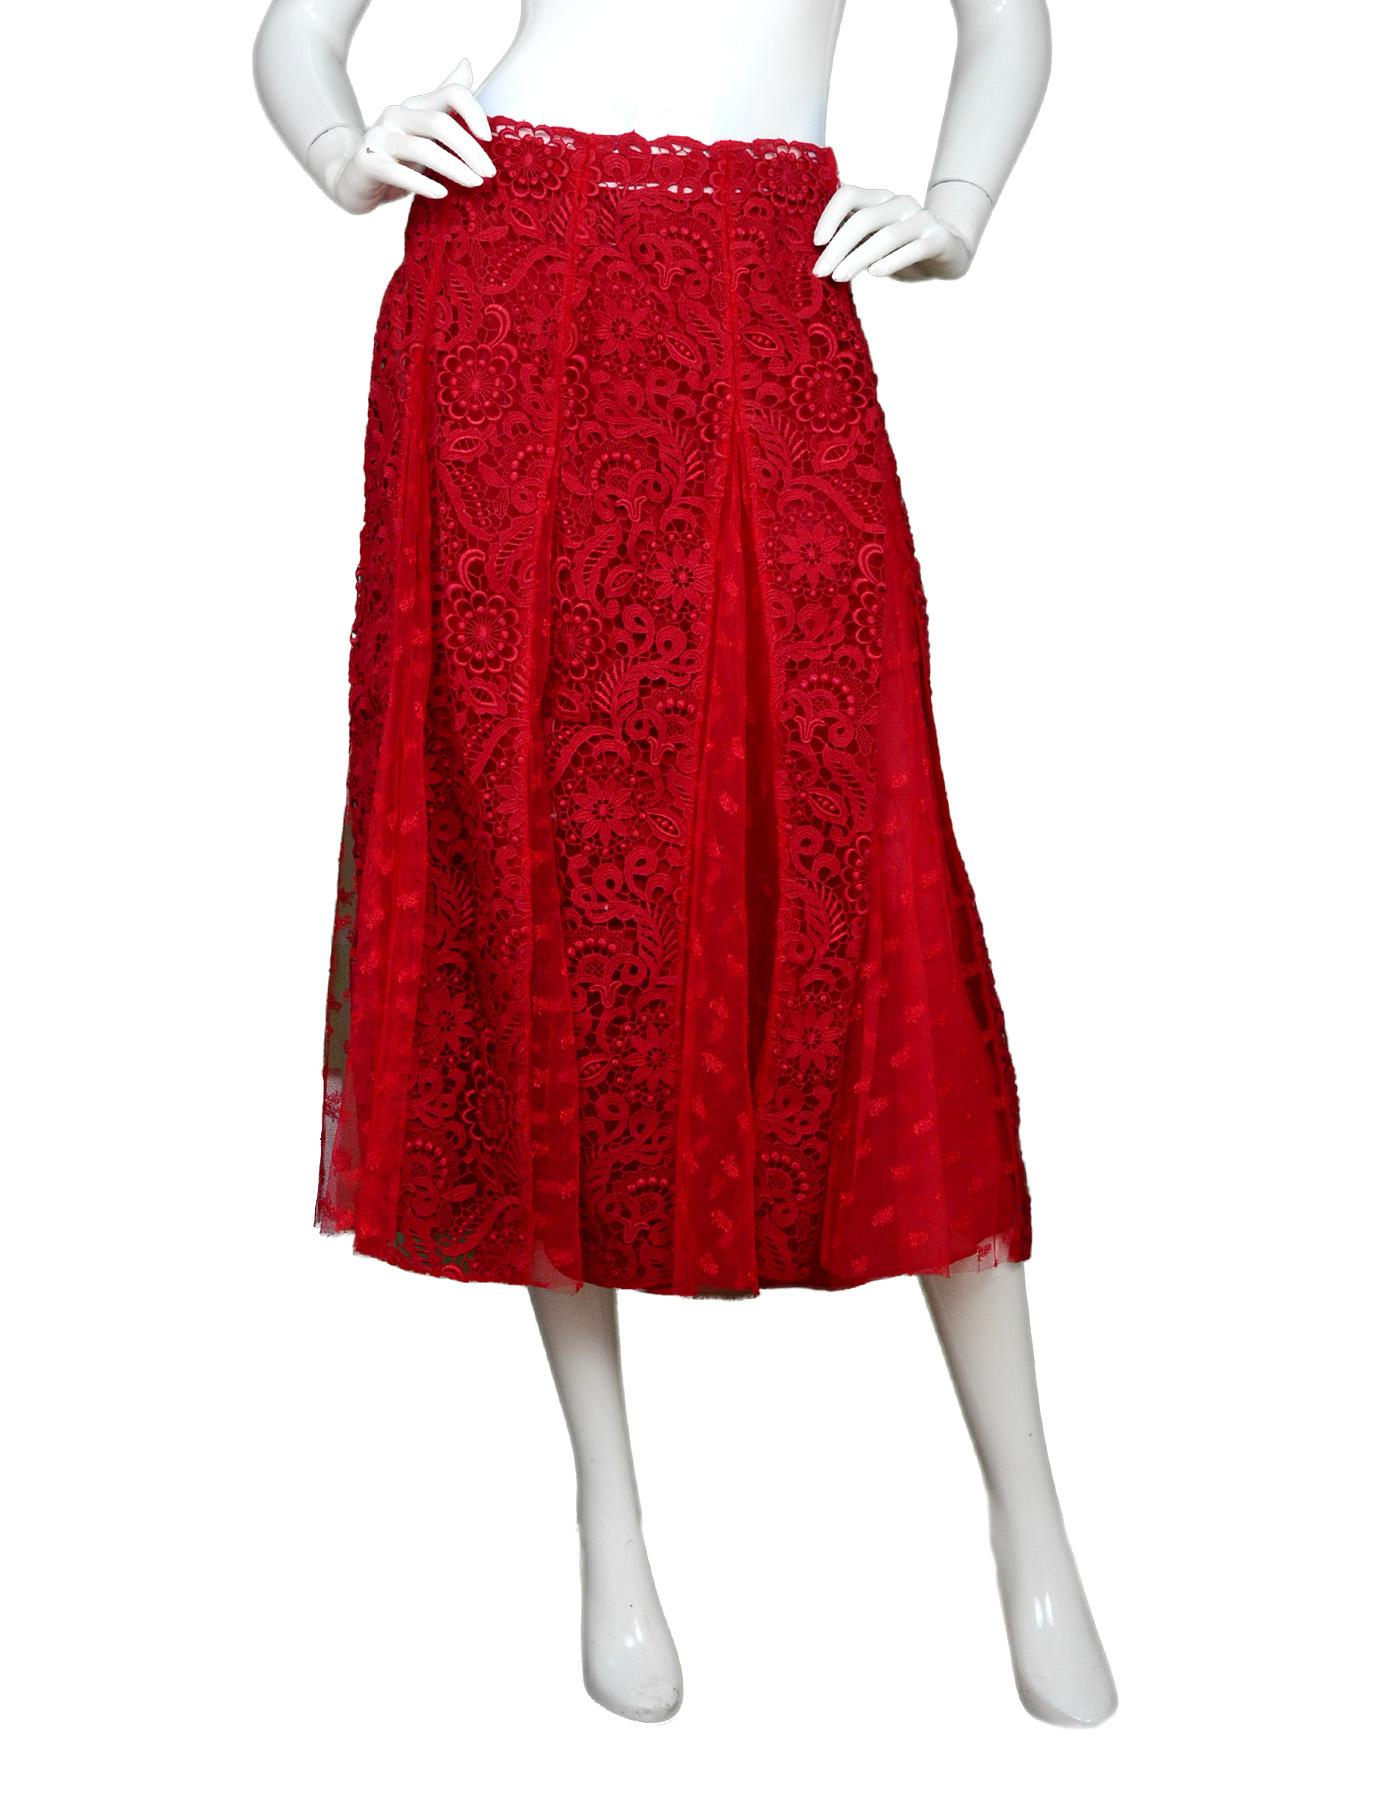 Valentino Red Lace Midi Skirt W/ Slip Sz 6

Made In: Italy
Color: Red
Materials: Lave (no composition tag)
Lining:  Fully lined silk fabric (no composition tag)
Overall Condition: Excellent pre-owned condition with the exception of missing